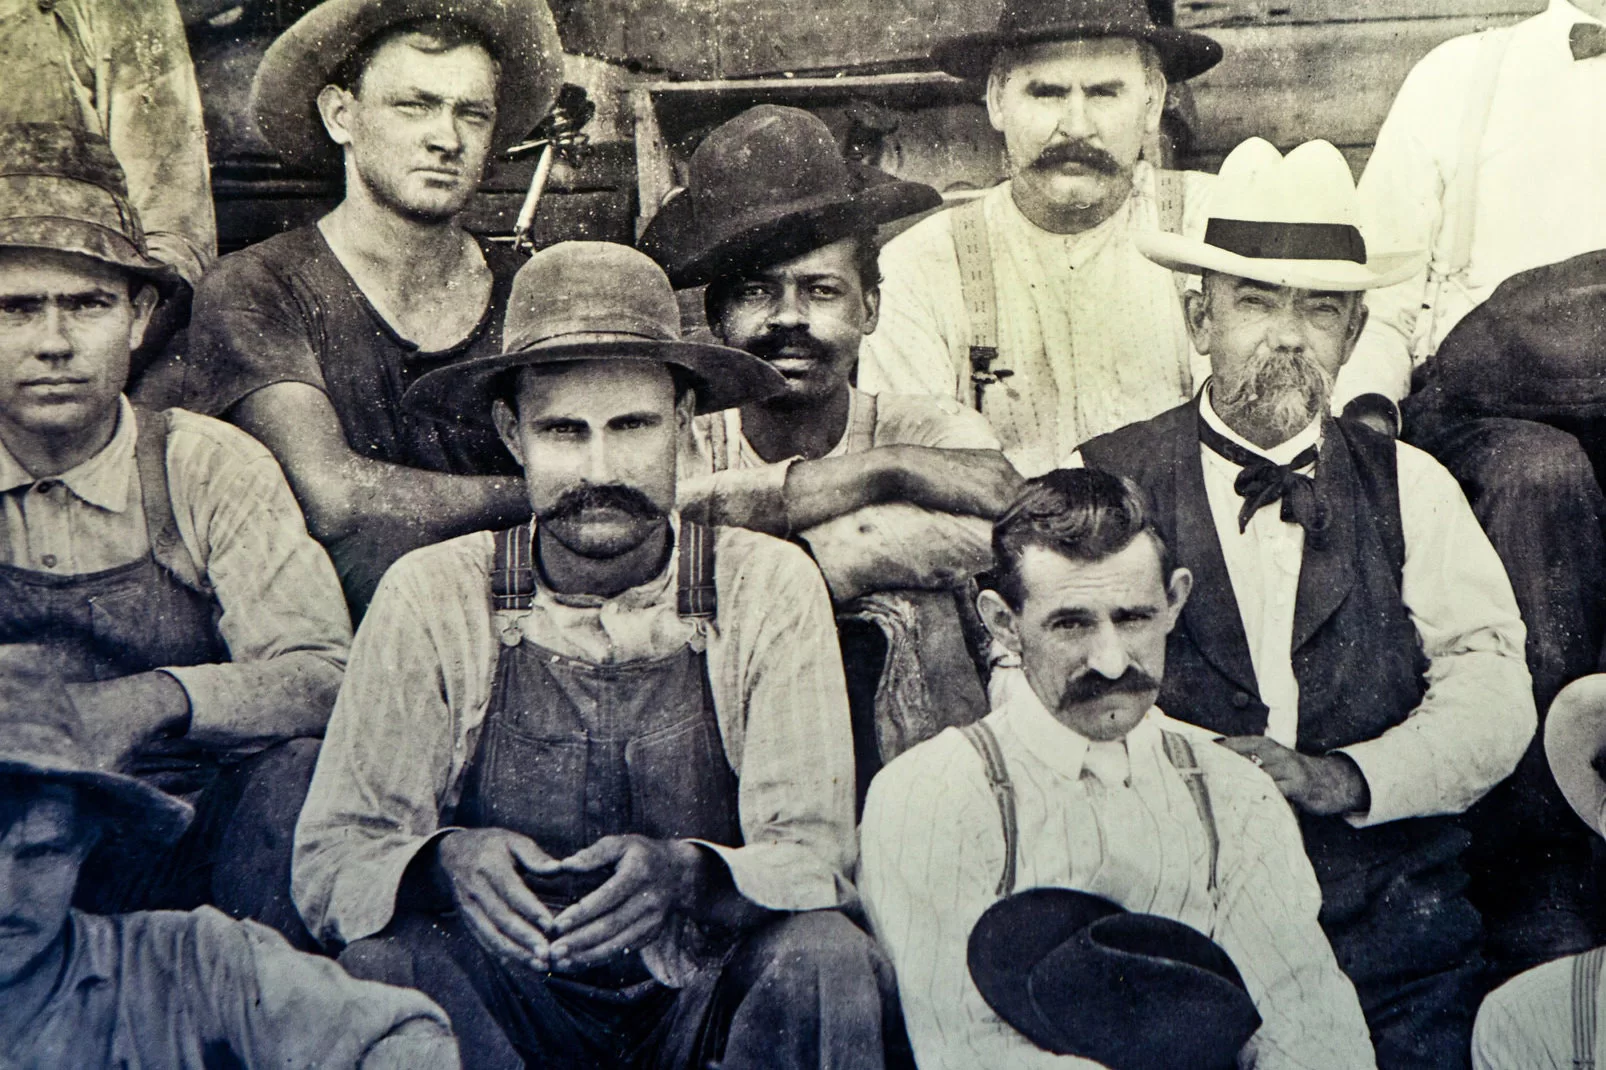 Historic image of Jack Daniel seated next to George Green, the son of Nathan "Nearest" Green, the man who taught Jack Daniel how to make whiskey.